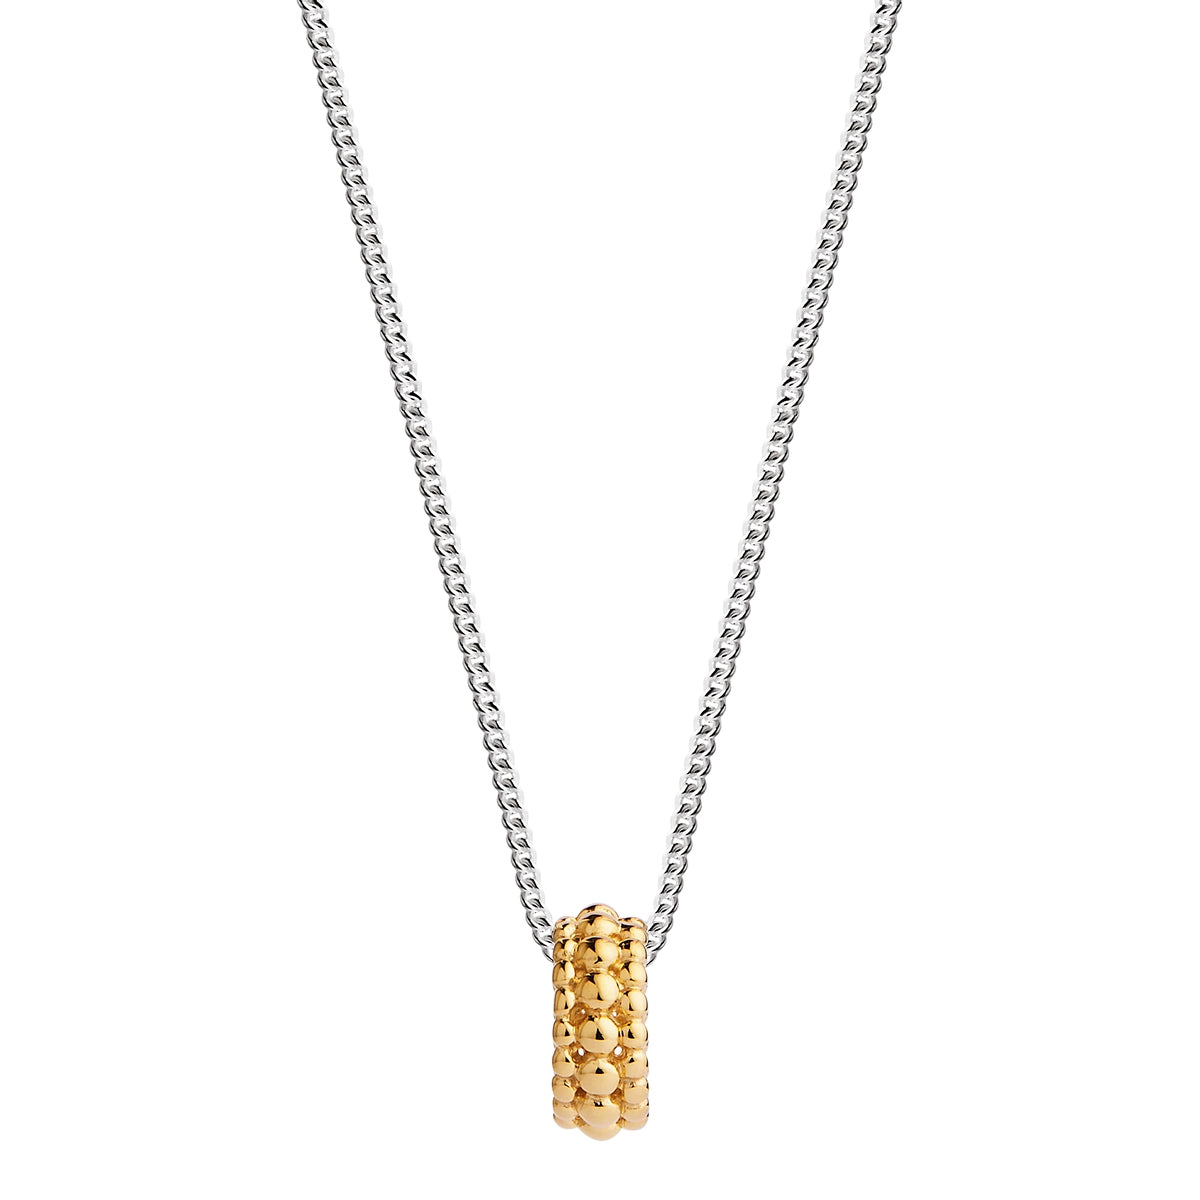 NAJO Chia Silver & Yellow Gold Necklace (45cm+ext)